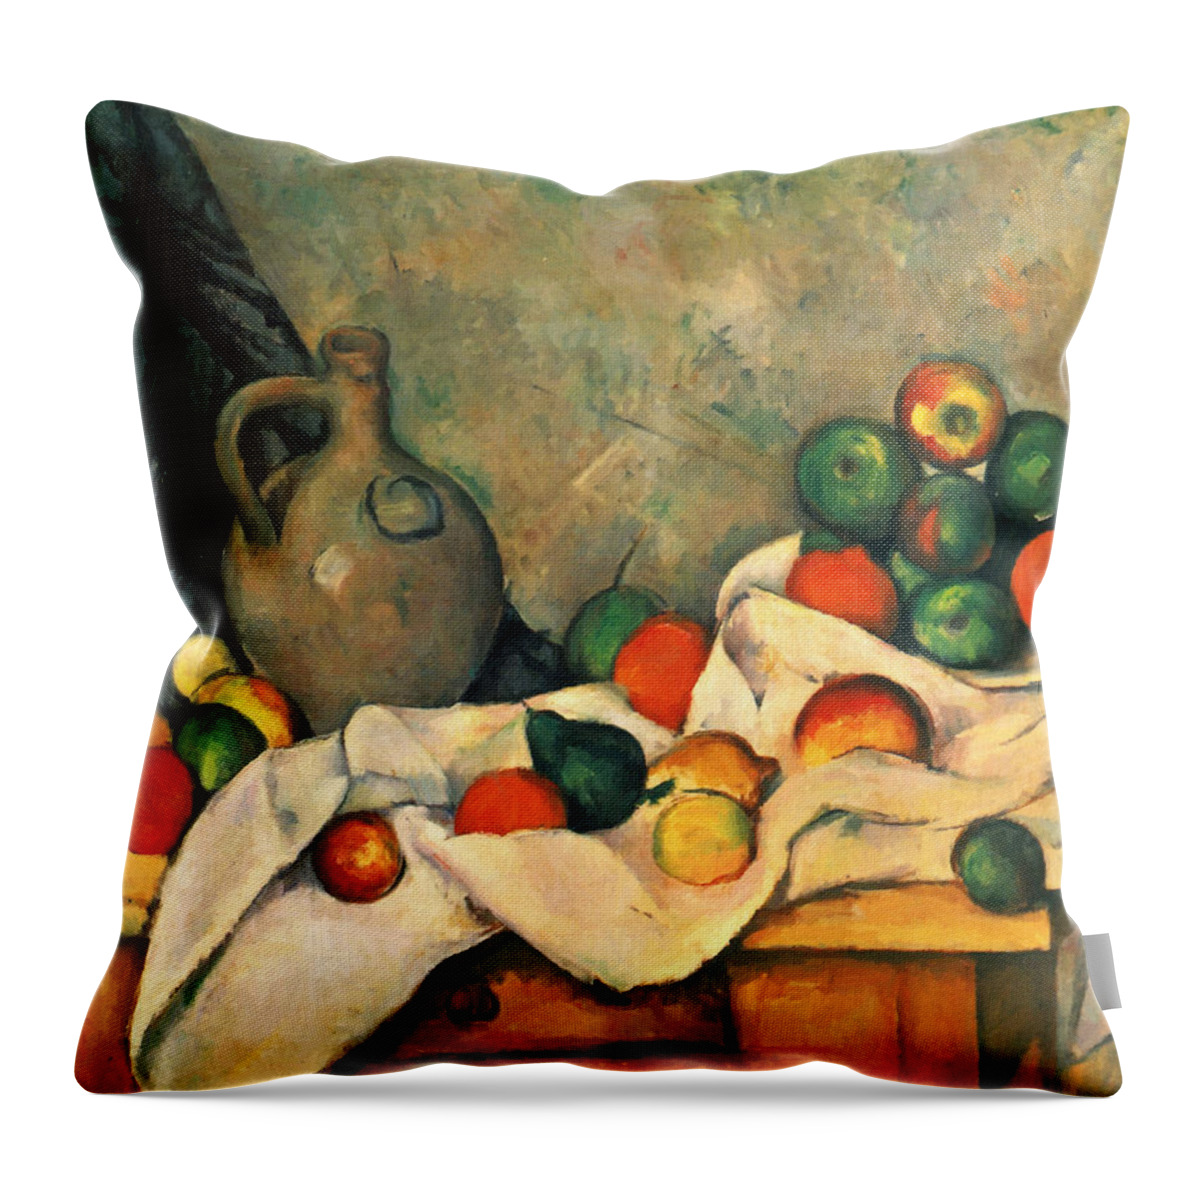 Paul Cezanne Throw Pillow featuring the painting Curtain, Jug And Fruit by Paul Cezanne